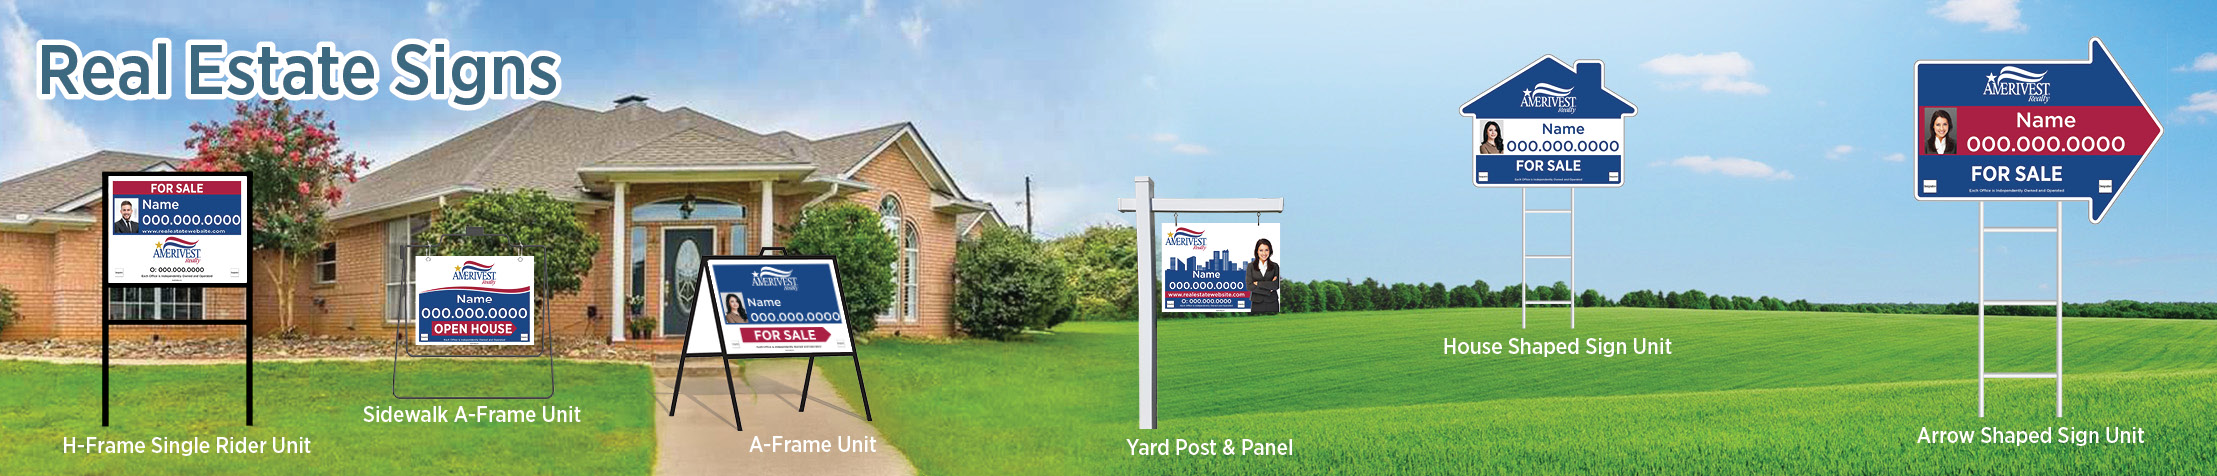 Amerivest Realty Real Estate Signs - AVR approved vendor real estate signs - H-Frame Units, Directional Signs, A-Frame Units, Yard Post and Panel | BestPrintBuy.com